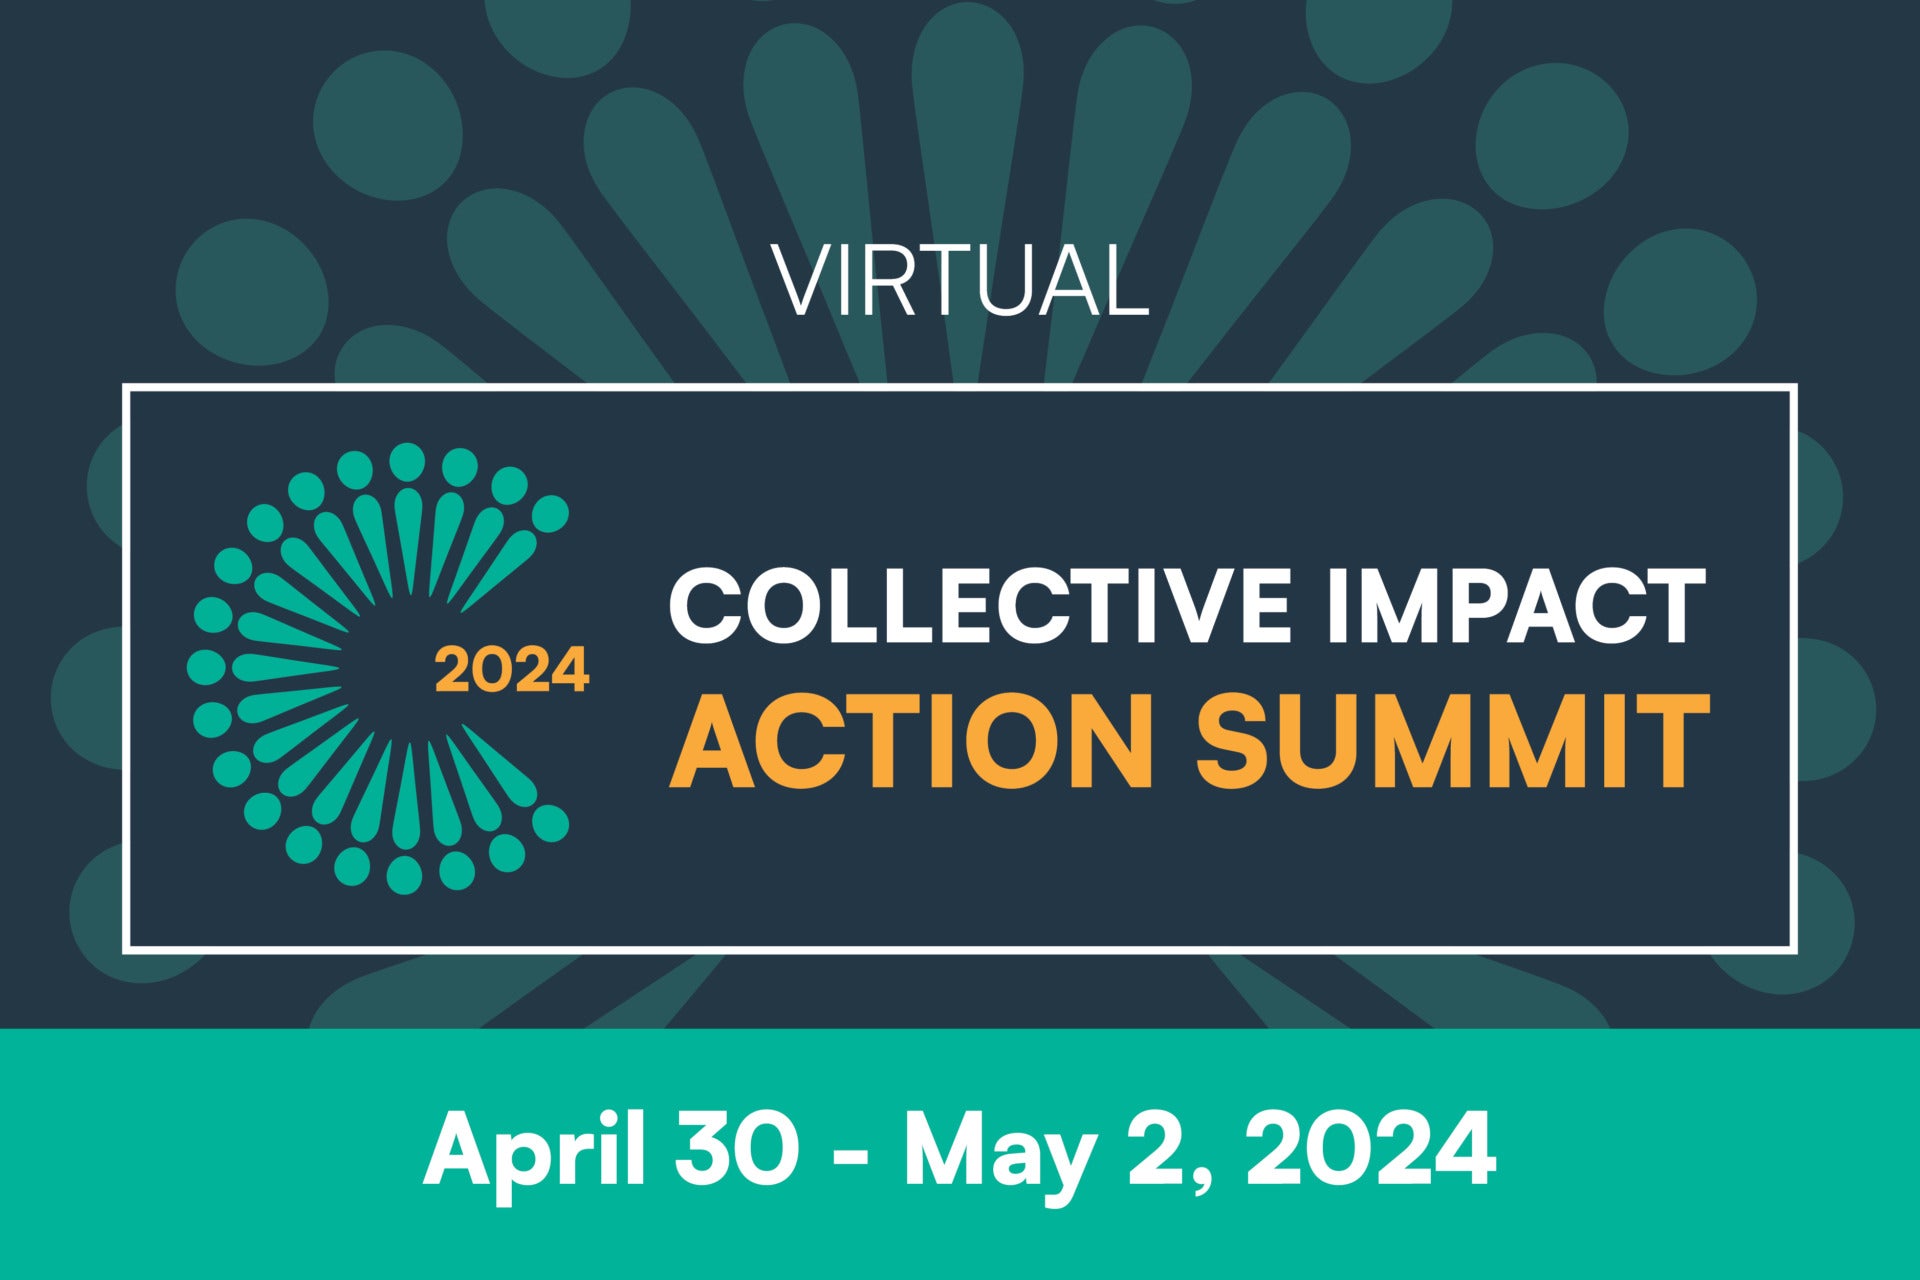 The 2024 Collective Impact Action Summit